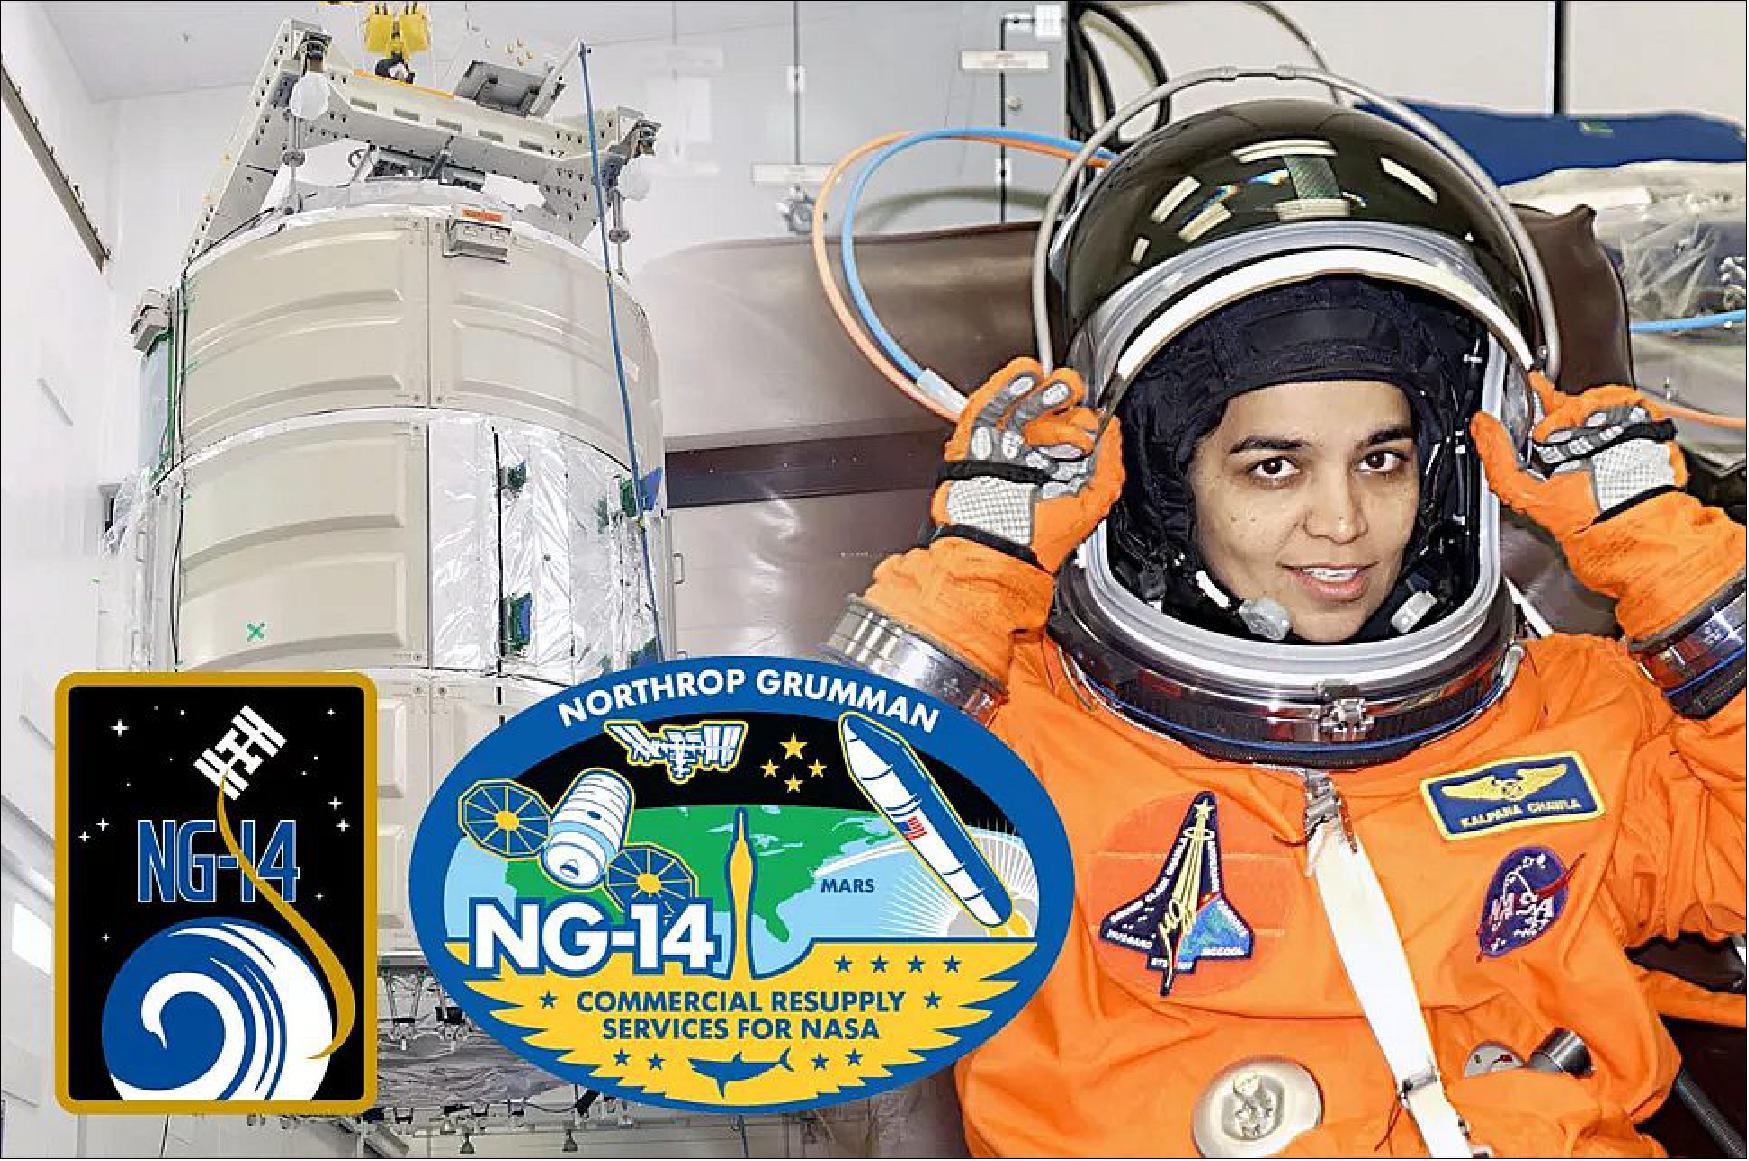 Figure 2: Northrop Grumman has announced that its next Cygnus capsule will be named the "S.S. Kalpana Chawla," in memory of the mission specialist who died with her six crewmates aboard the space shuttle Columbia in 2003.Kalpana Chawla was the first Indian-born woman and NASA astronaut to fly into space (image credit: Northrop Grumman/NASA/collectSPACE.com) 3)